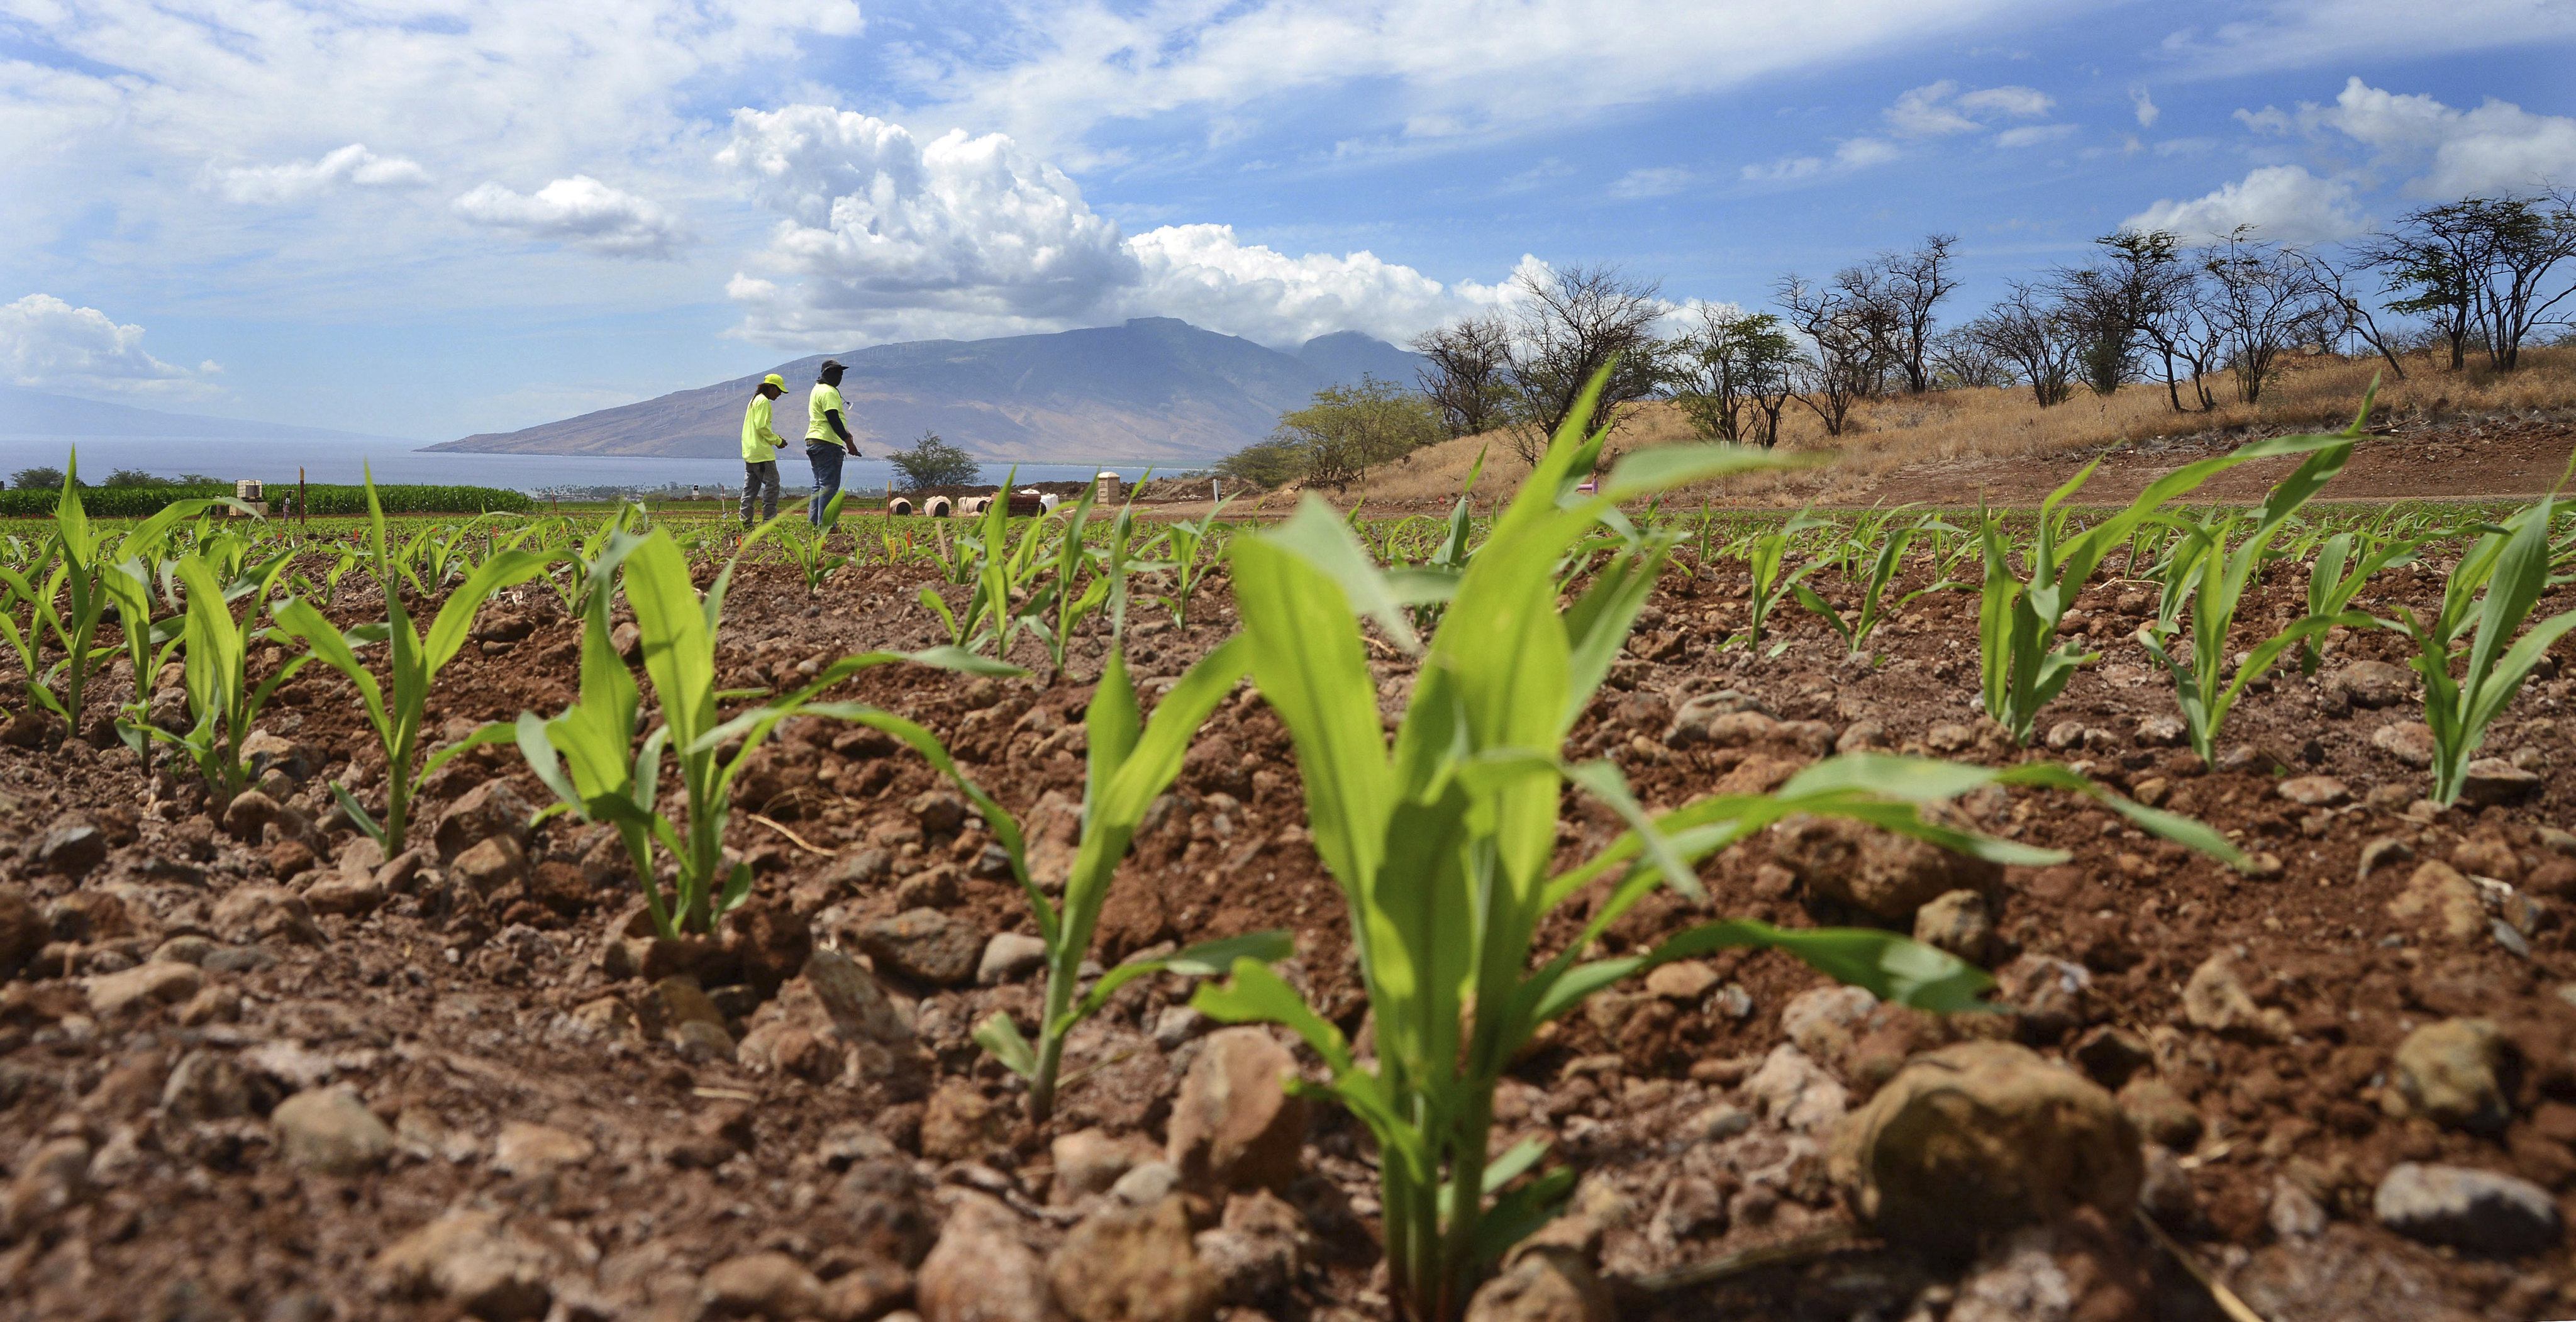 Investigators found one of Haitao Xiang’s electronic devices contained copies of the Nutrient Optimiser algorithm, part of an online farming platform developed by Monsanto and The Climate Corporation. Photo: The Maui News via AP